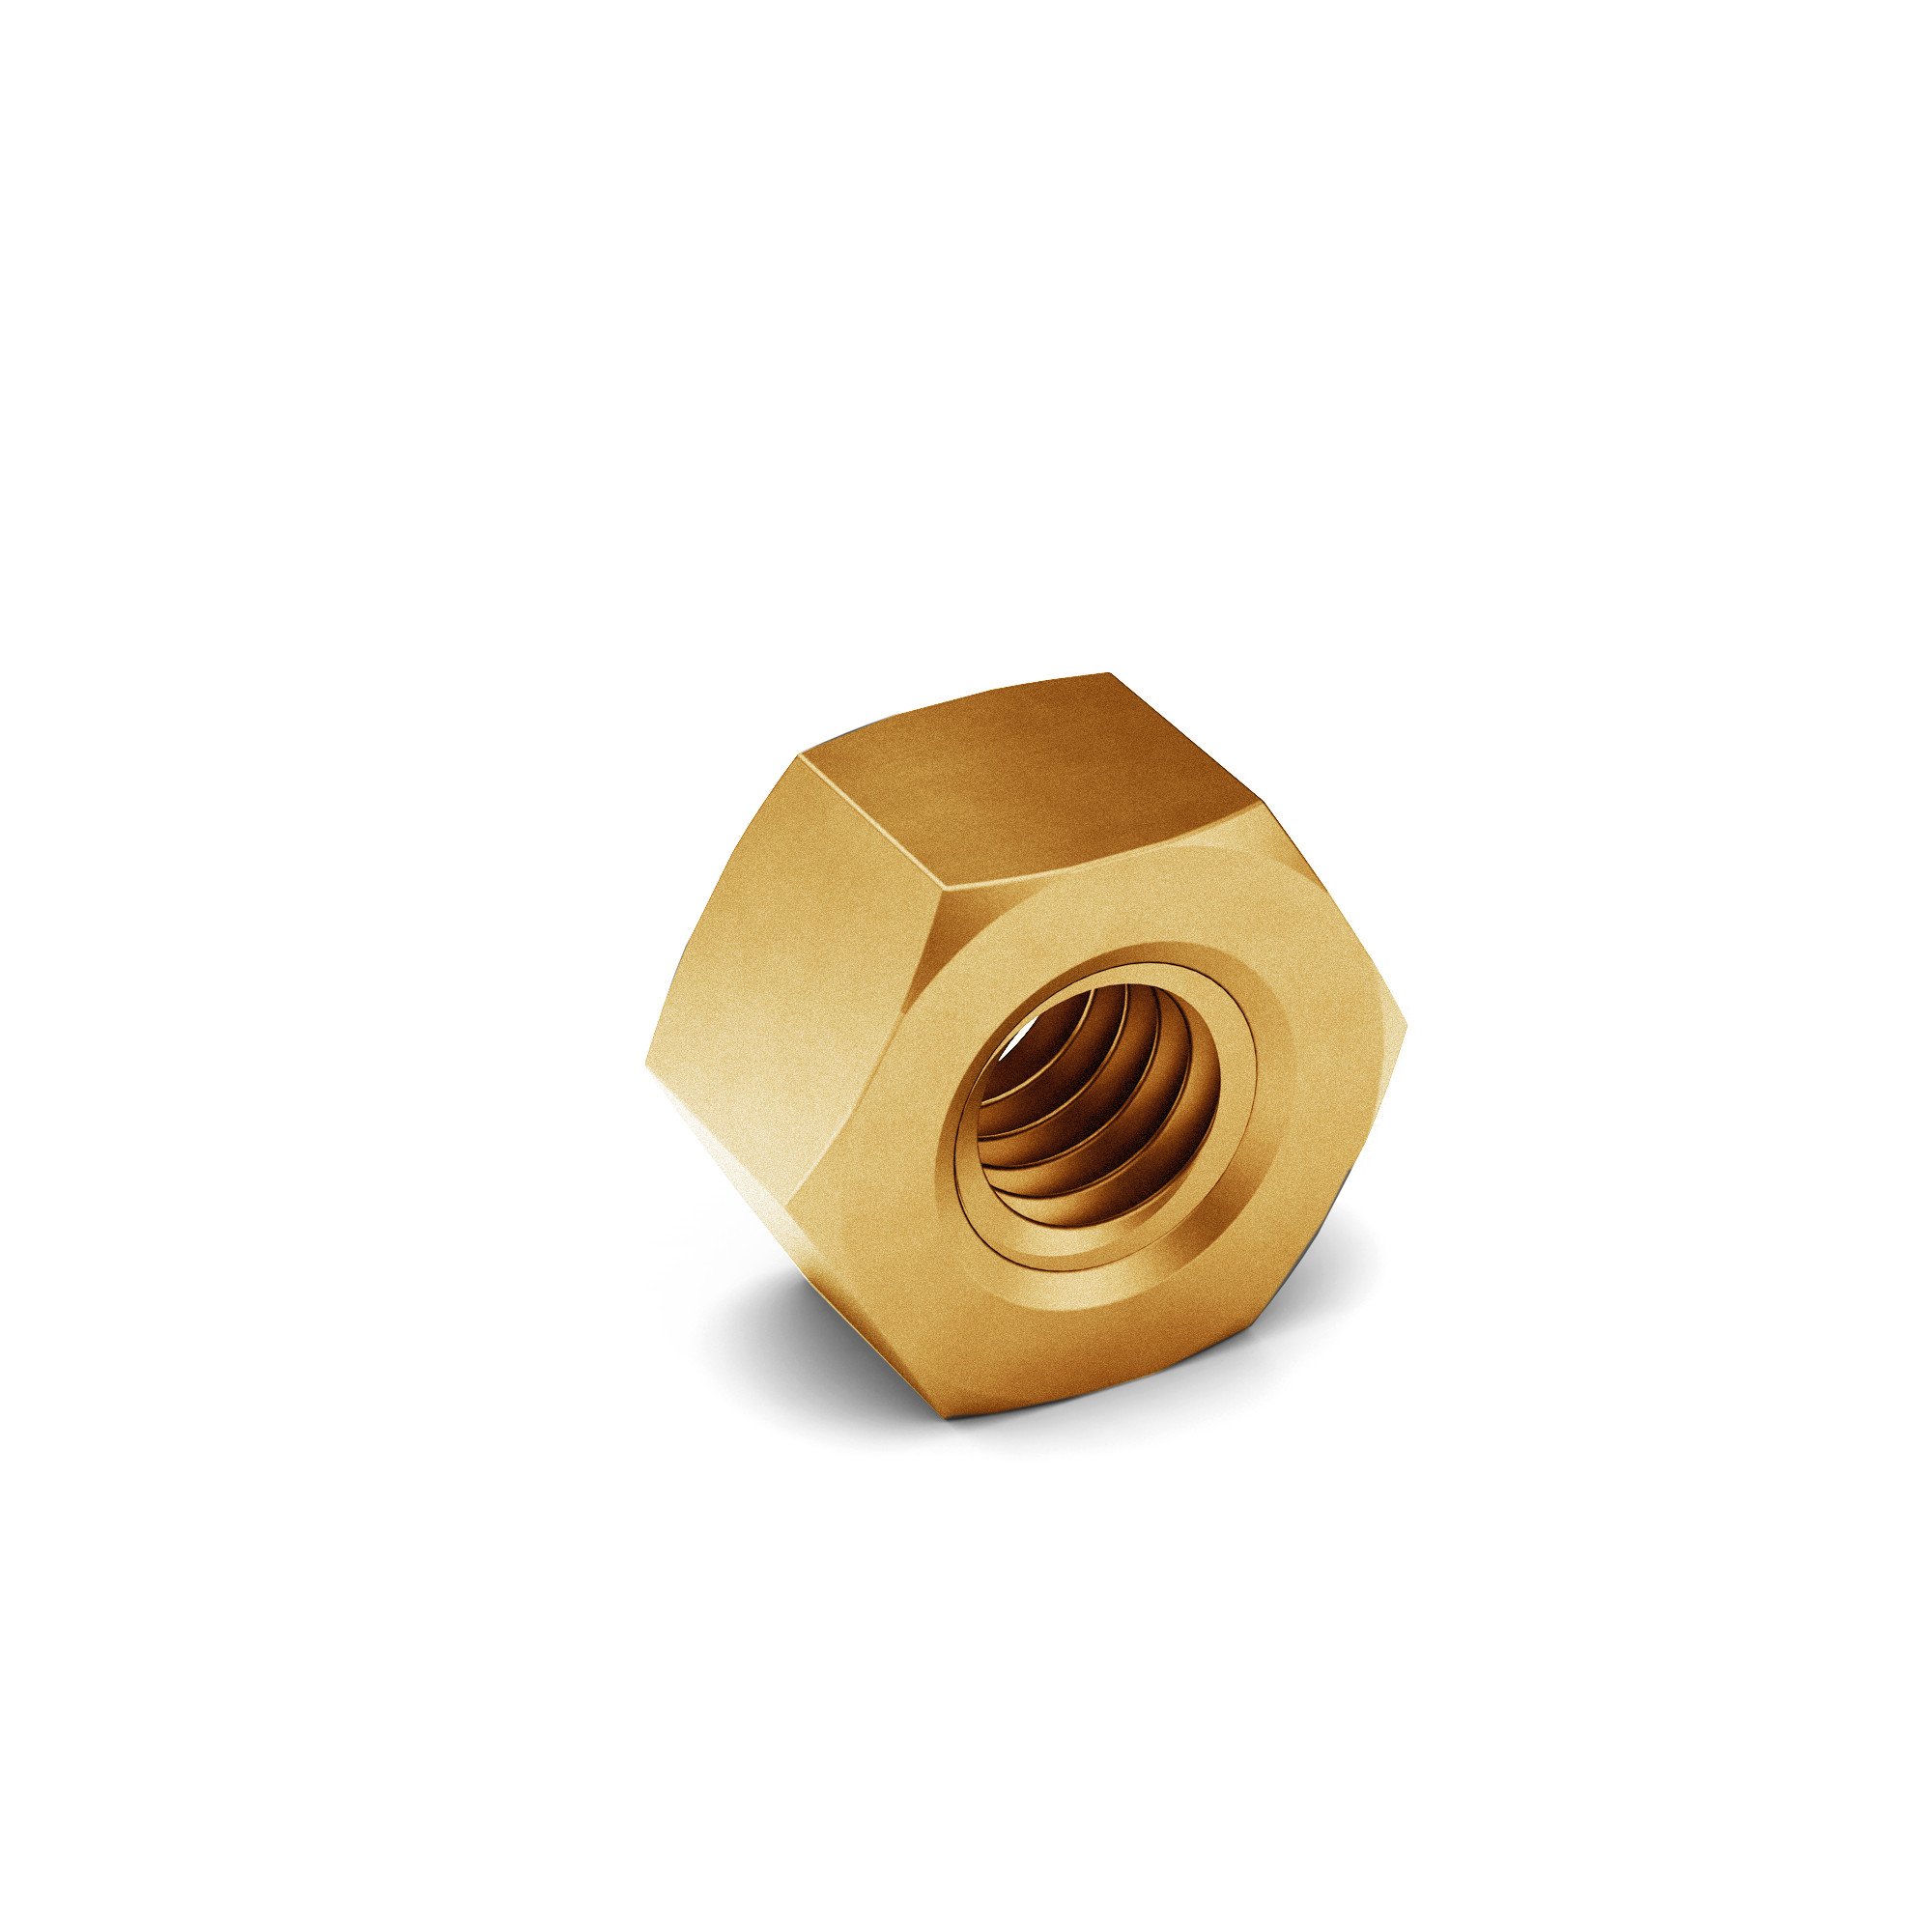 1 3/8-6 J995 GR 5 Hex Nut Zinc Yellow Special: WAF: 2.010-1.951 Thick: 1.188 +/- 0.062